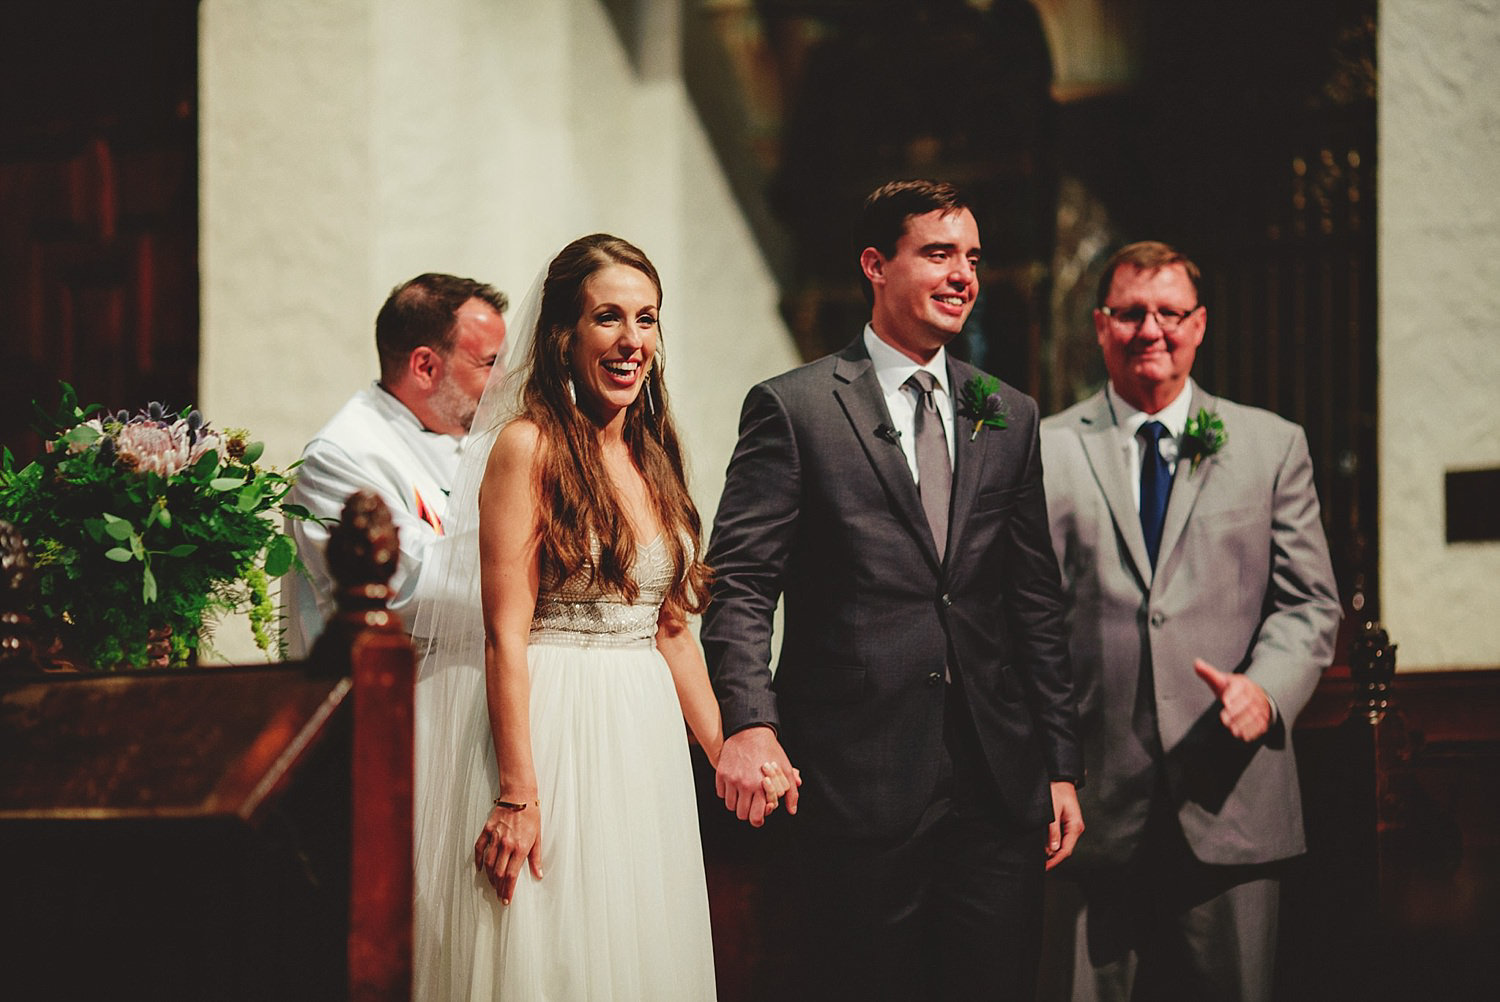 knowles memorial chapel wedding: extremely happy couple